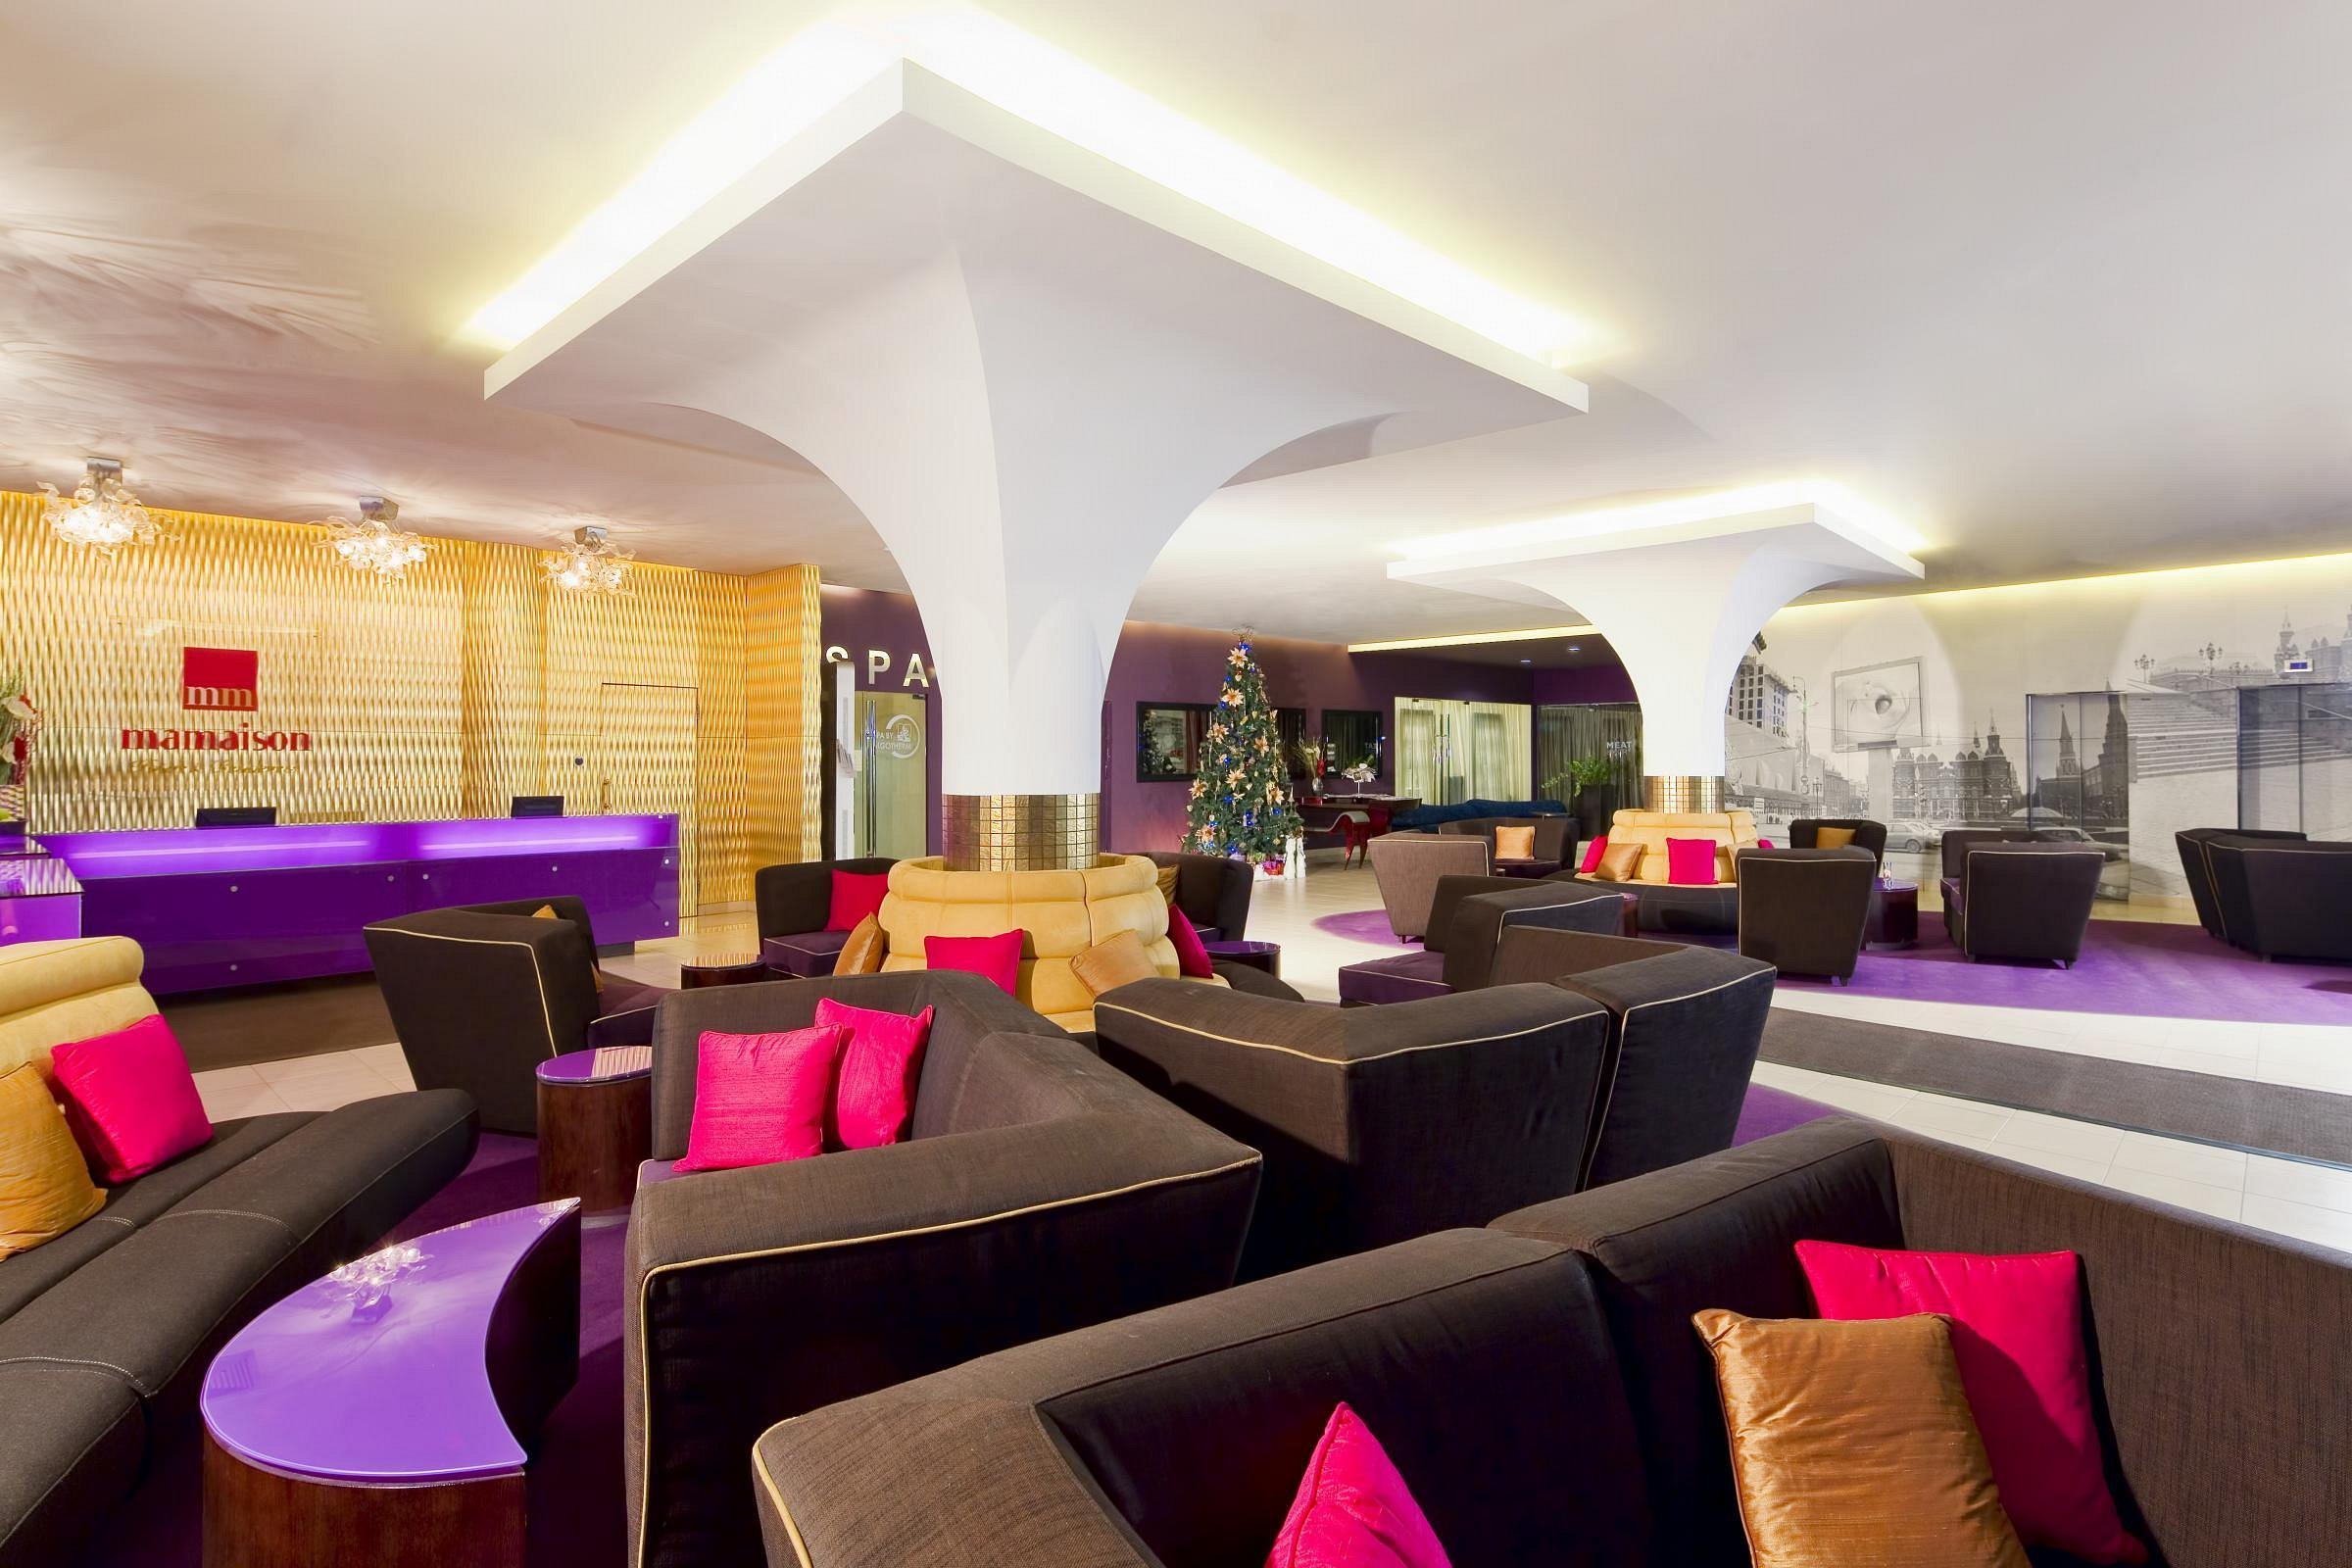 Mamaison All-Suites SPA Hotel Pokrovka